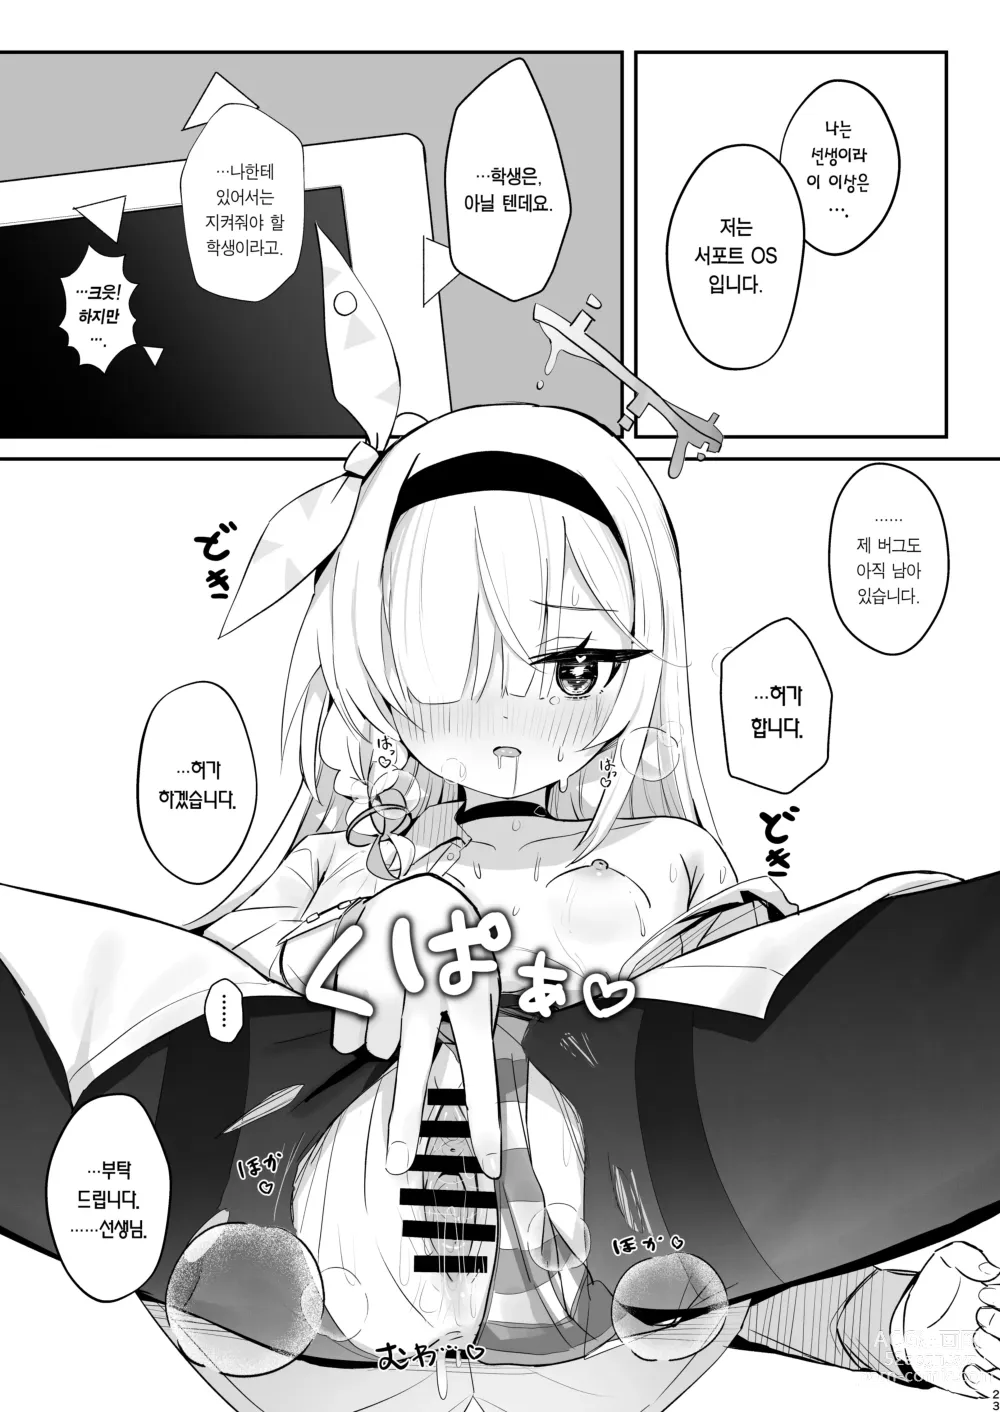 Page 22 of doujinshi 이 따스함을 알아버렸어